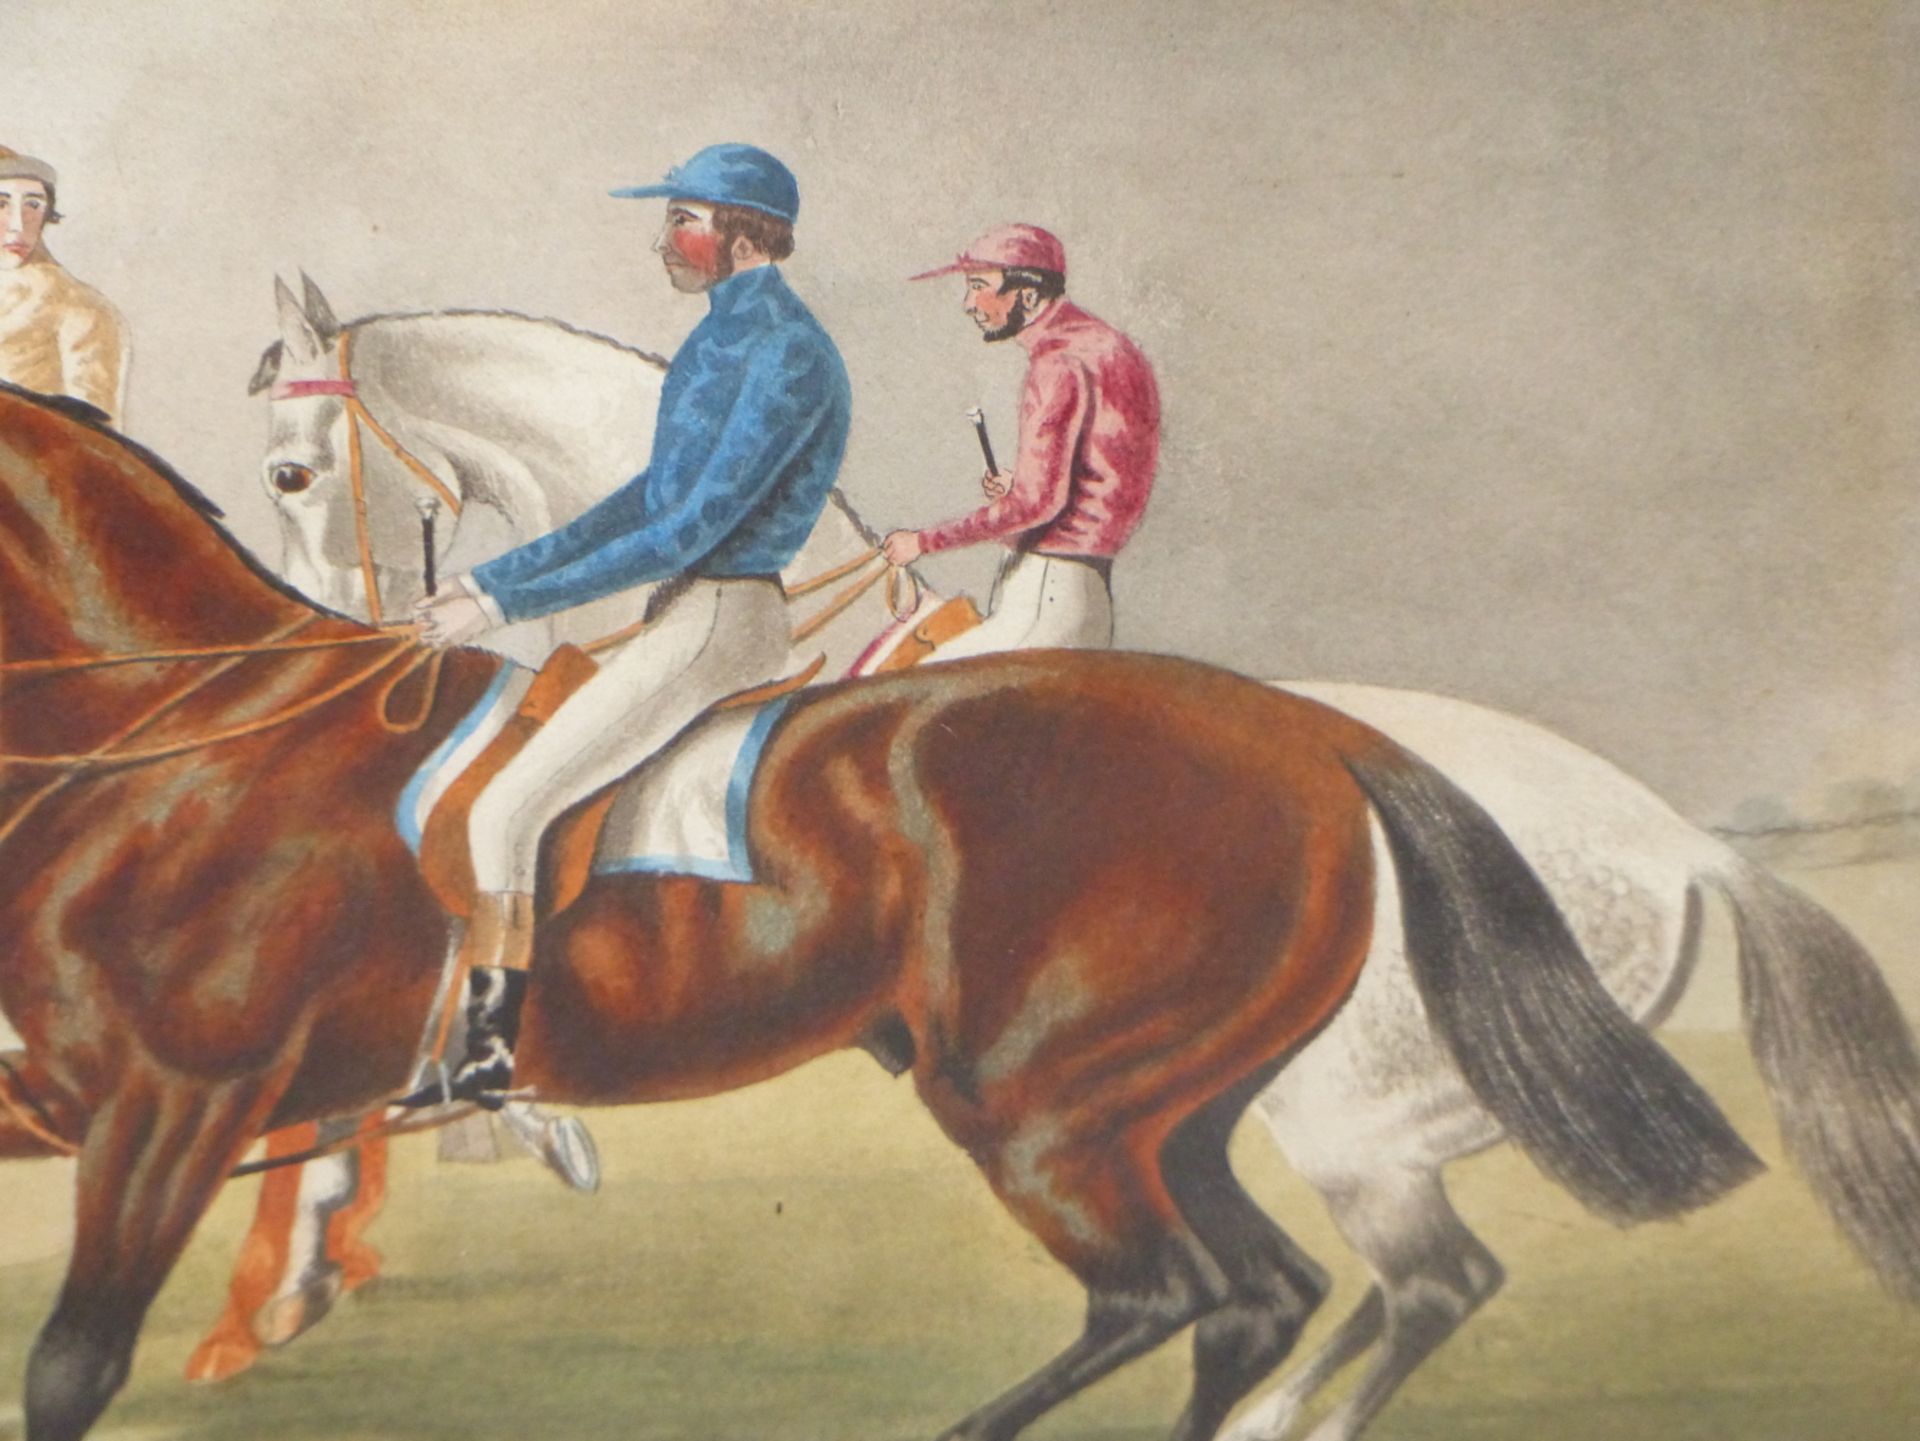 19th C. ENGLISH SCHOOL DANIEL O'ROUKE WINNING HE DERBY 1852, REPUTEDLY BY JAMES G. NOBLE, - Image 17 of 26